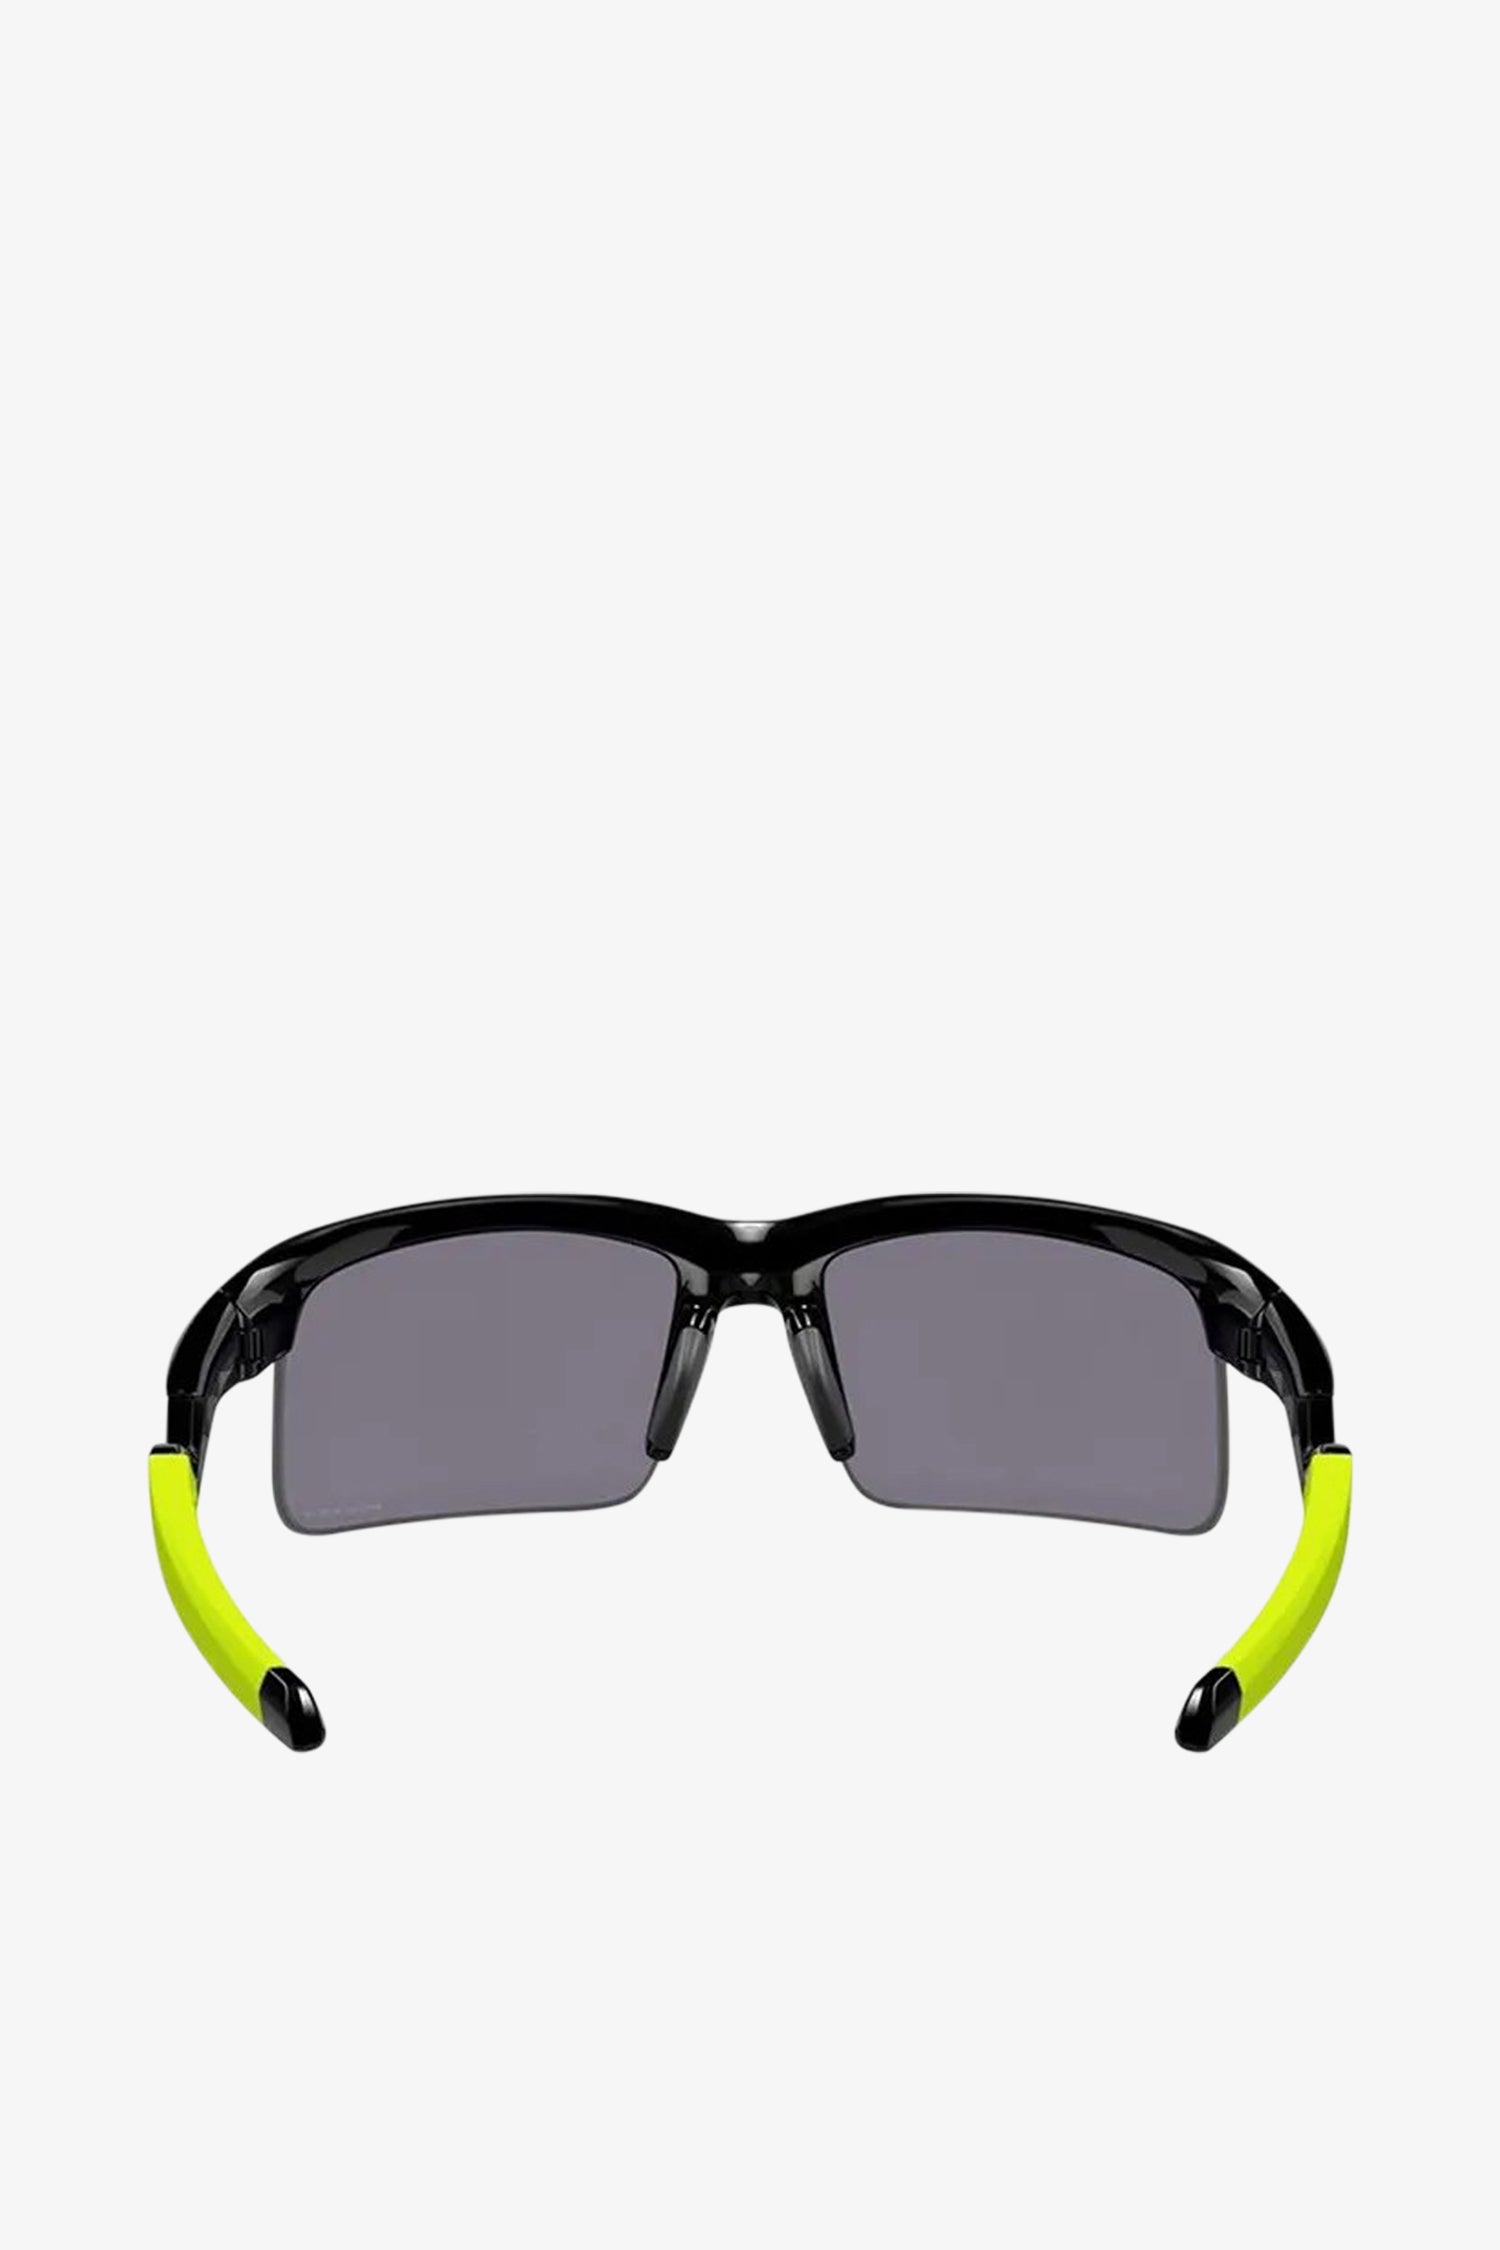 Capacitor (Youth Fit) Sunglasses- Selectshop FRAME